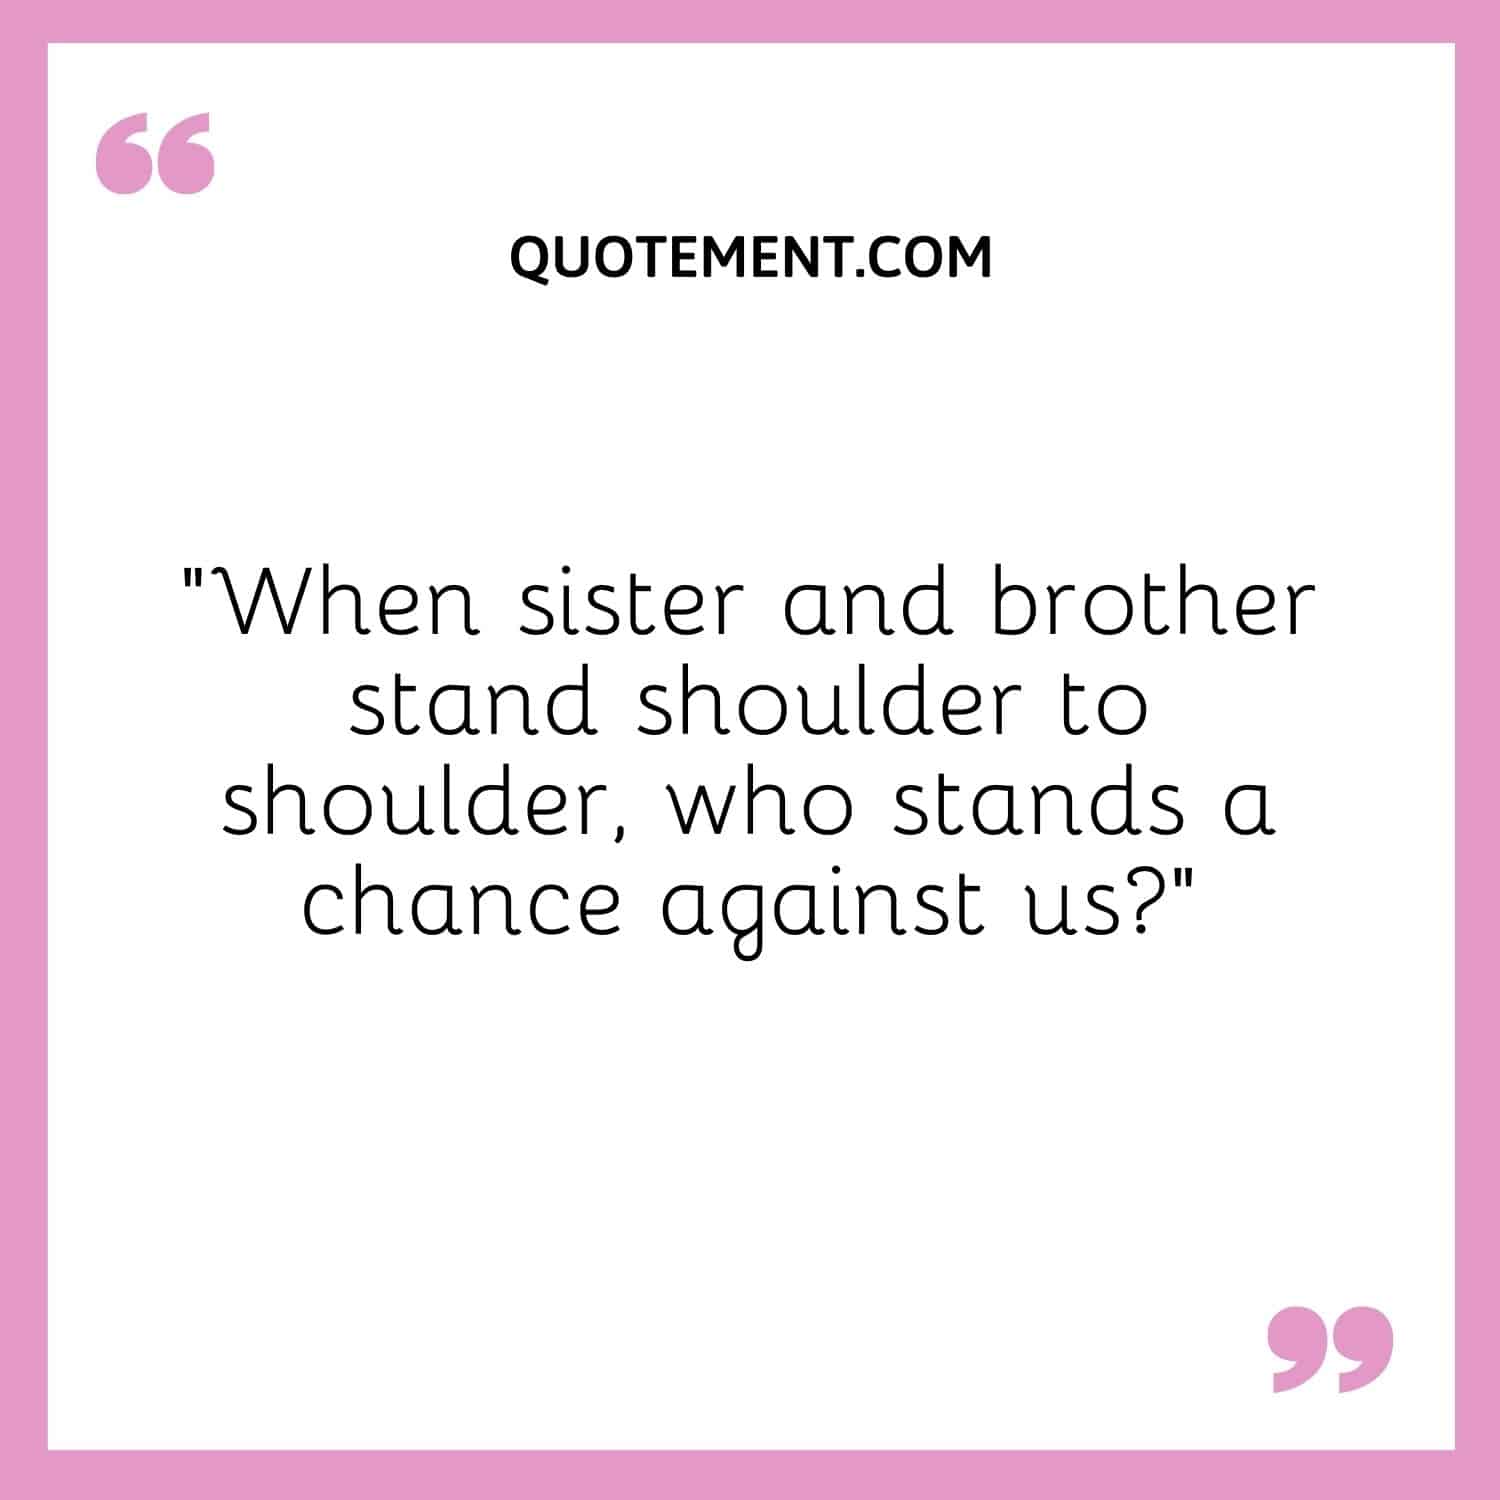 When sister and brother stand shoulder to shoulder, who stands a chance against us